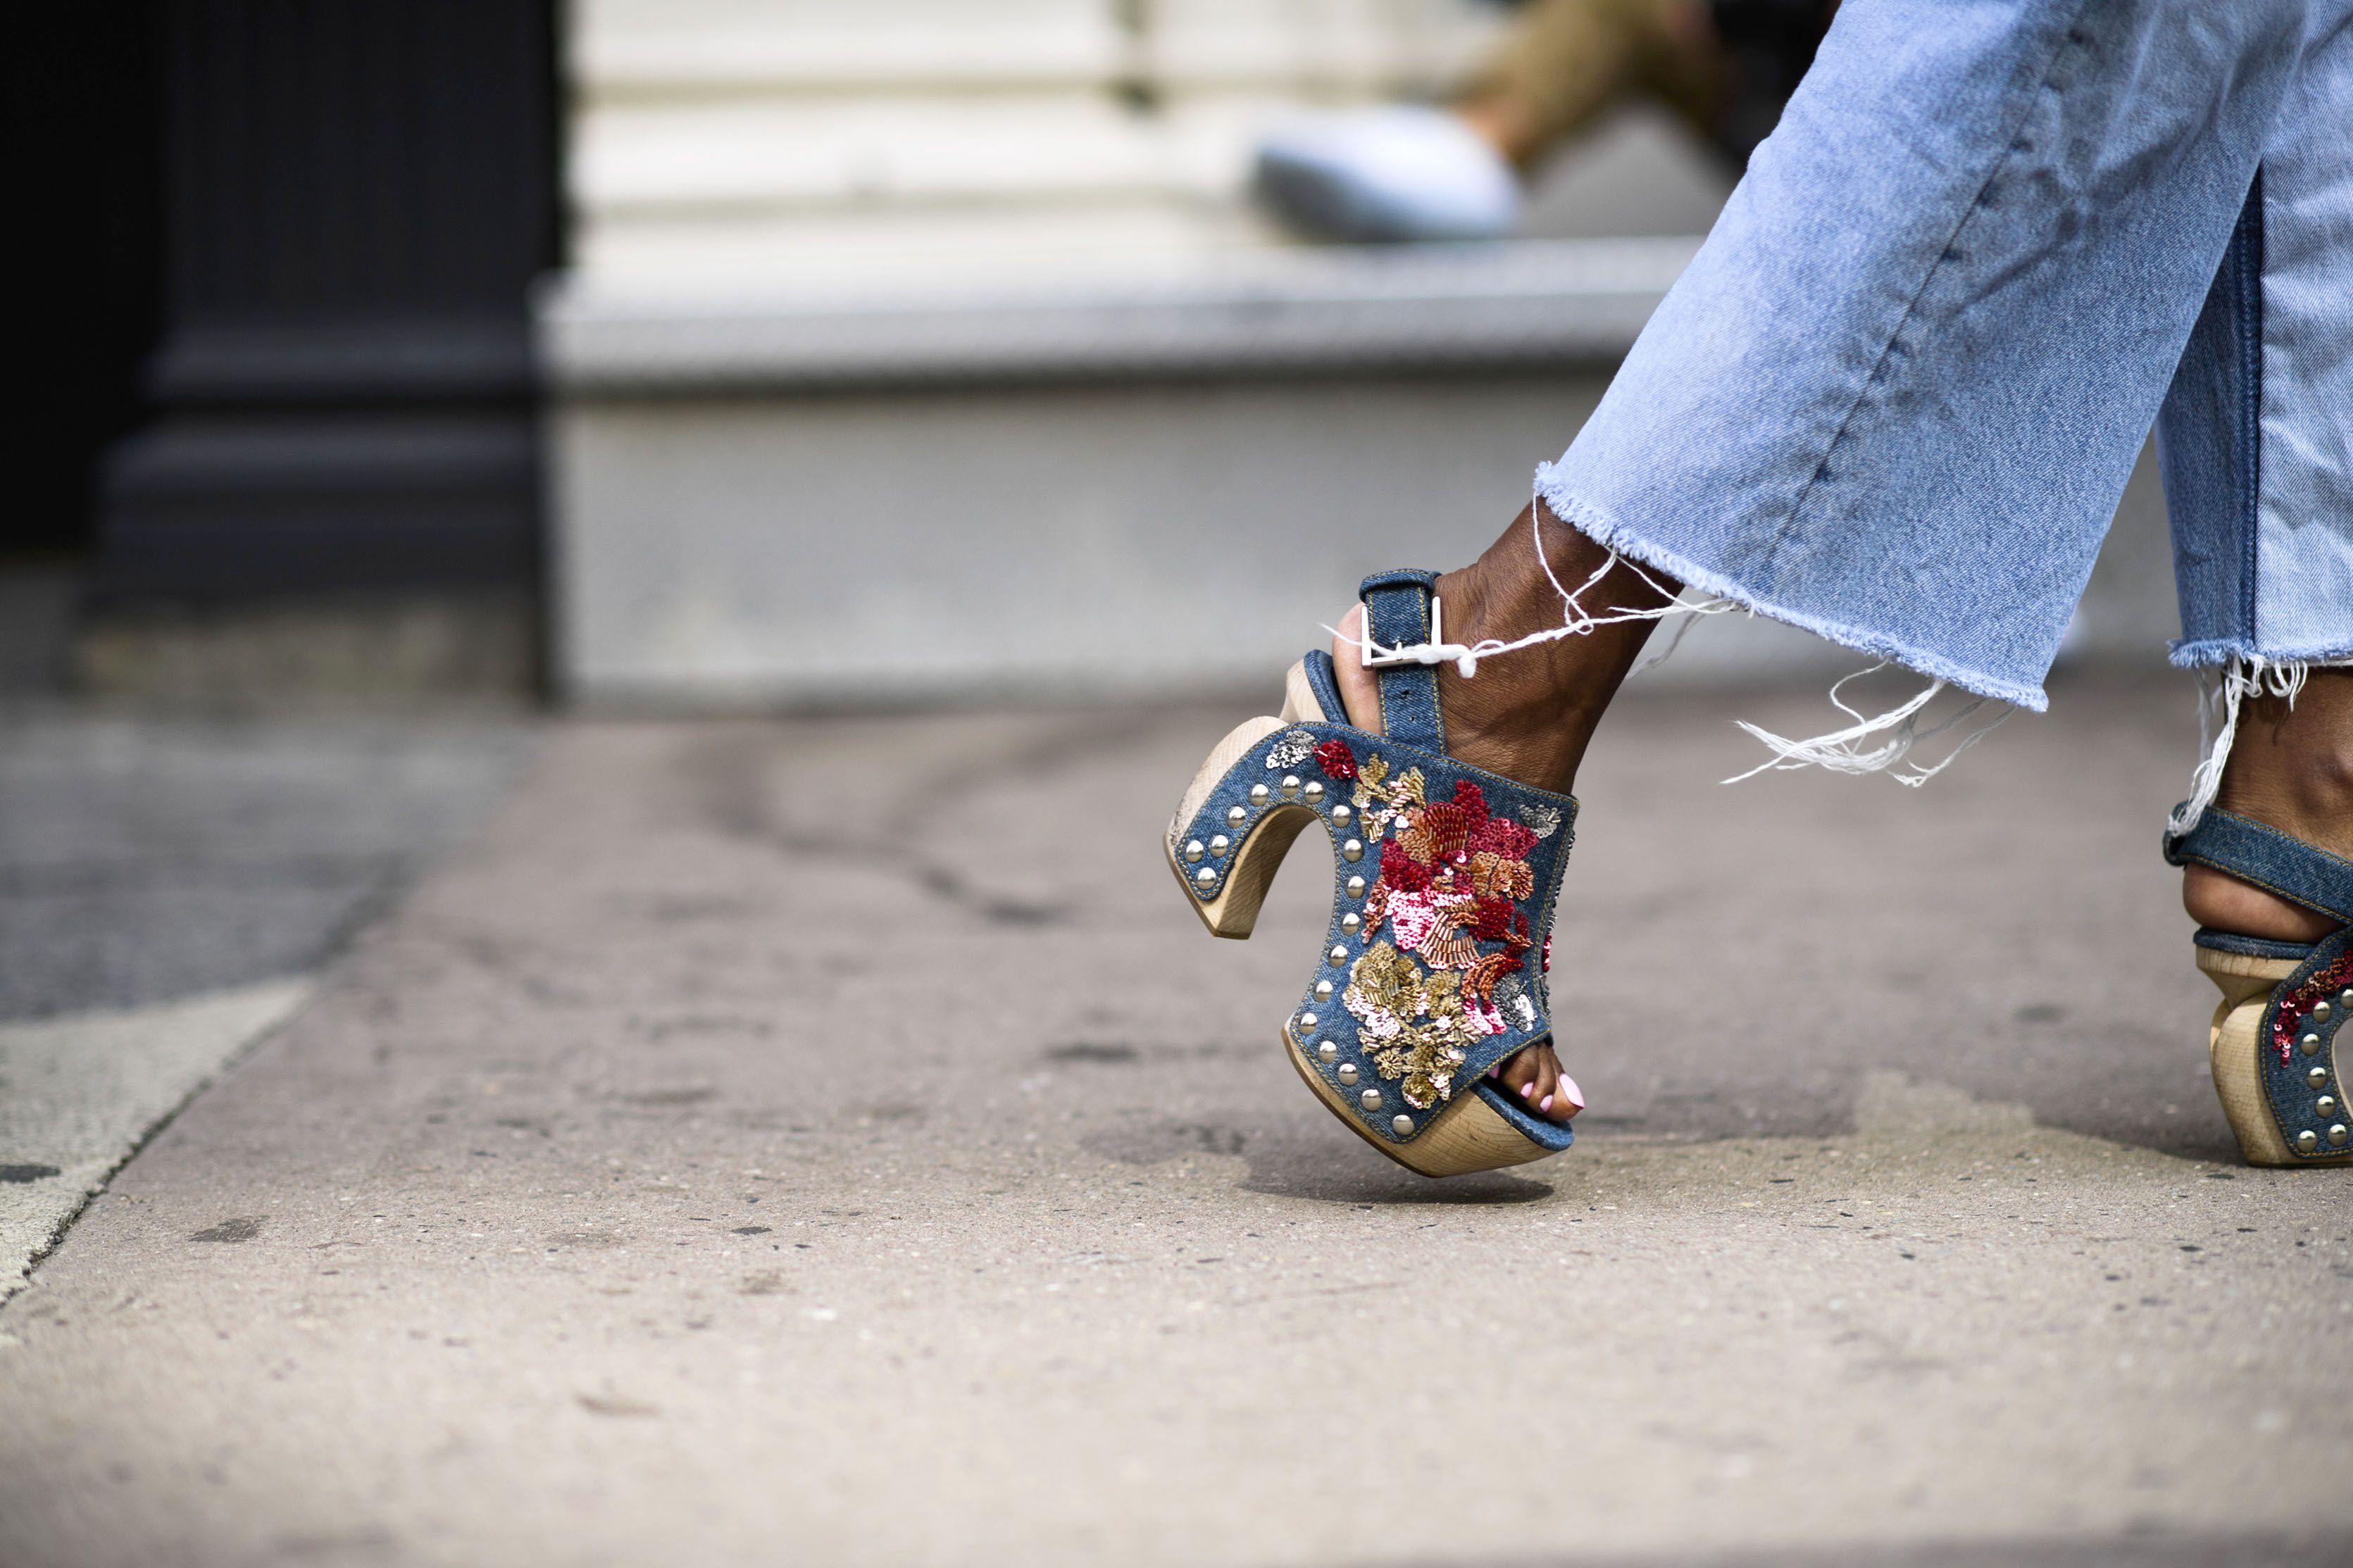 The Best Street Style from The Spring 2018 Women's Fashion Shows